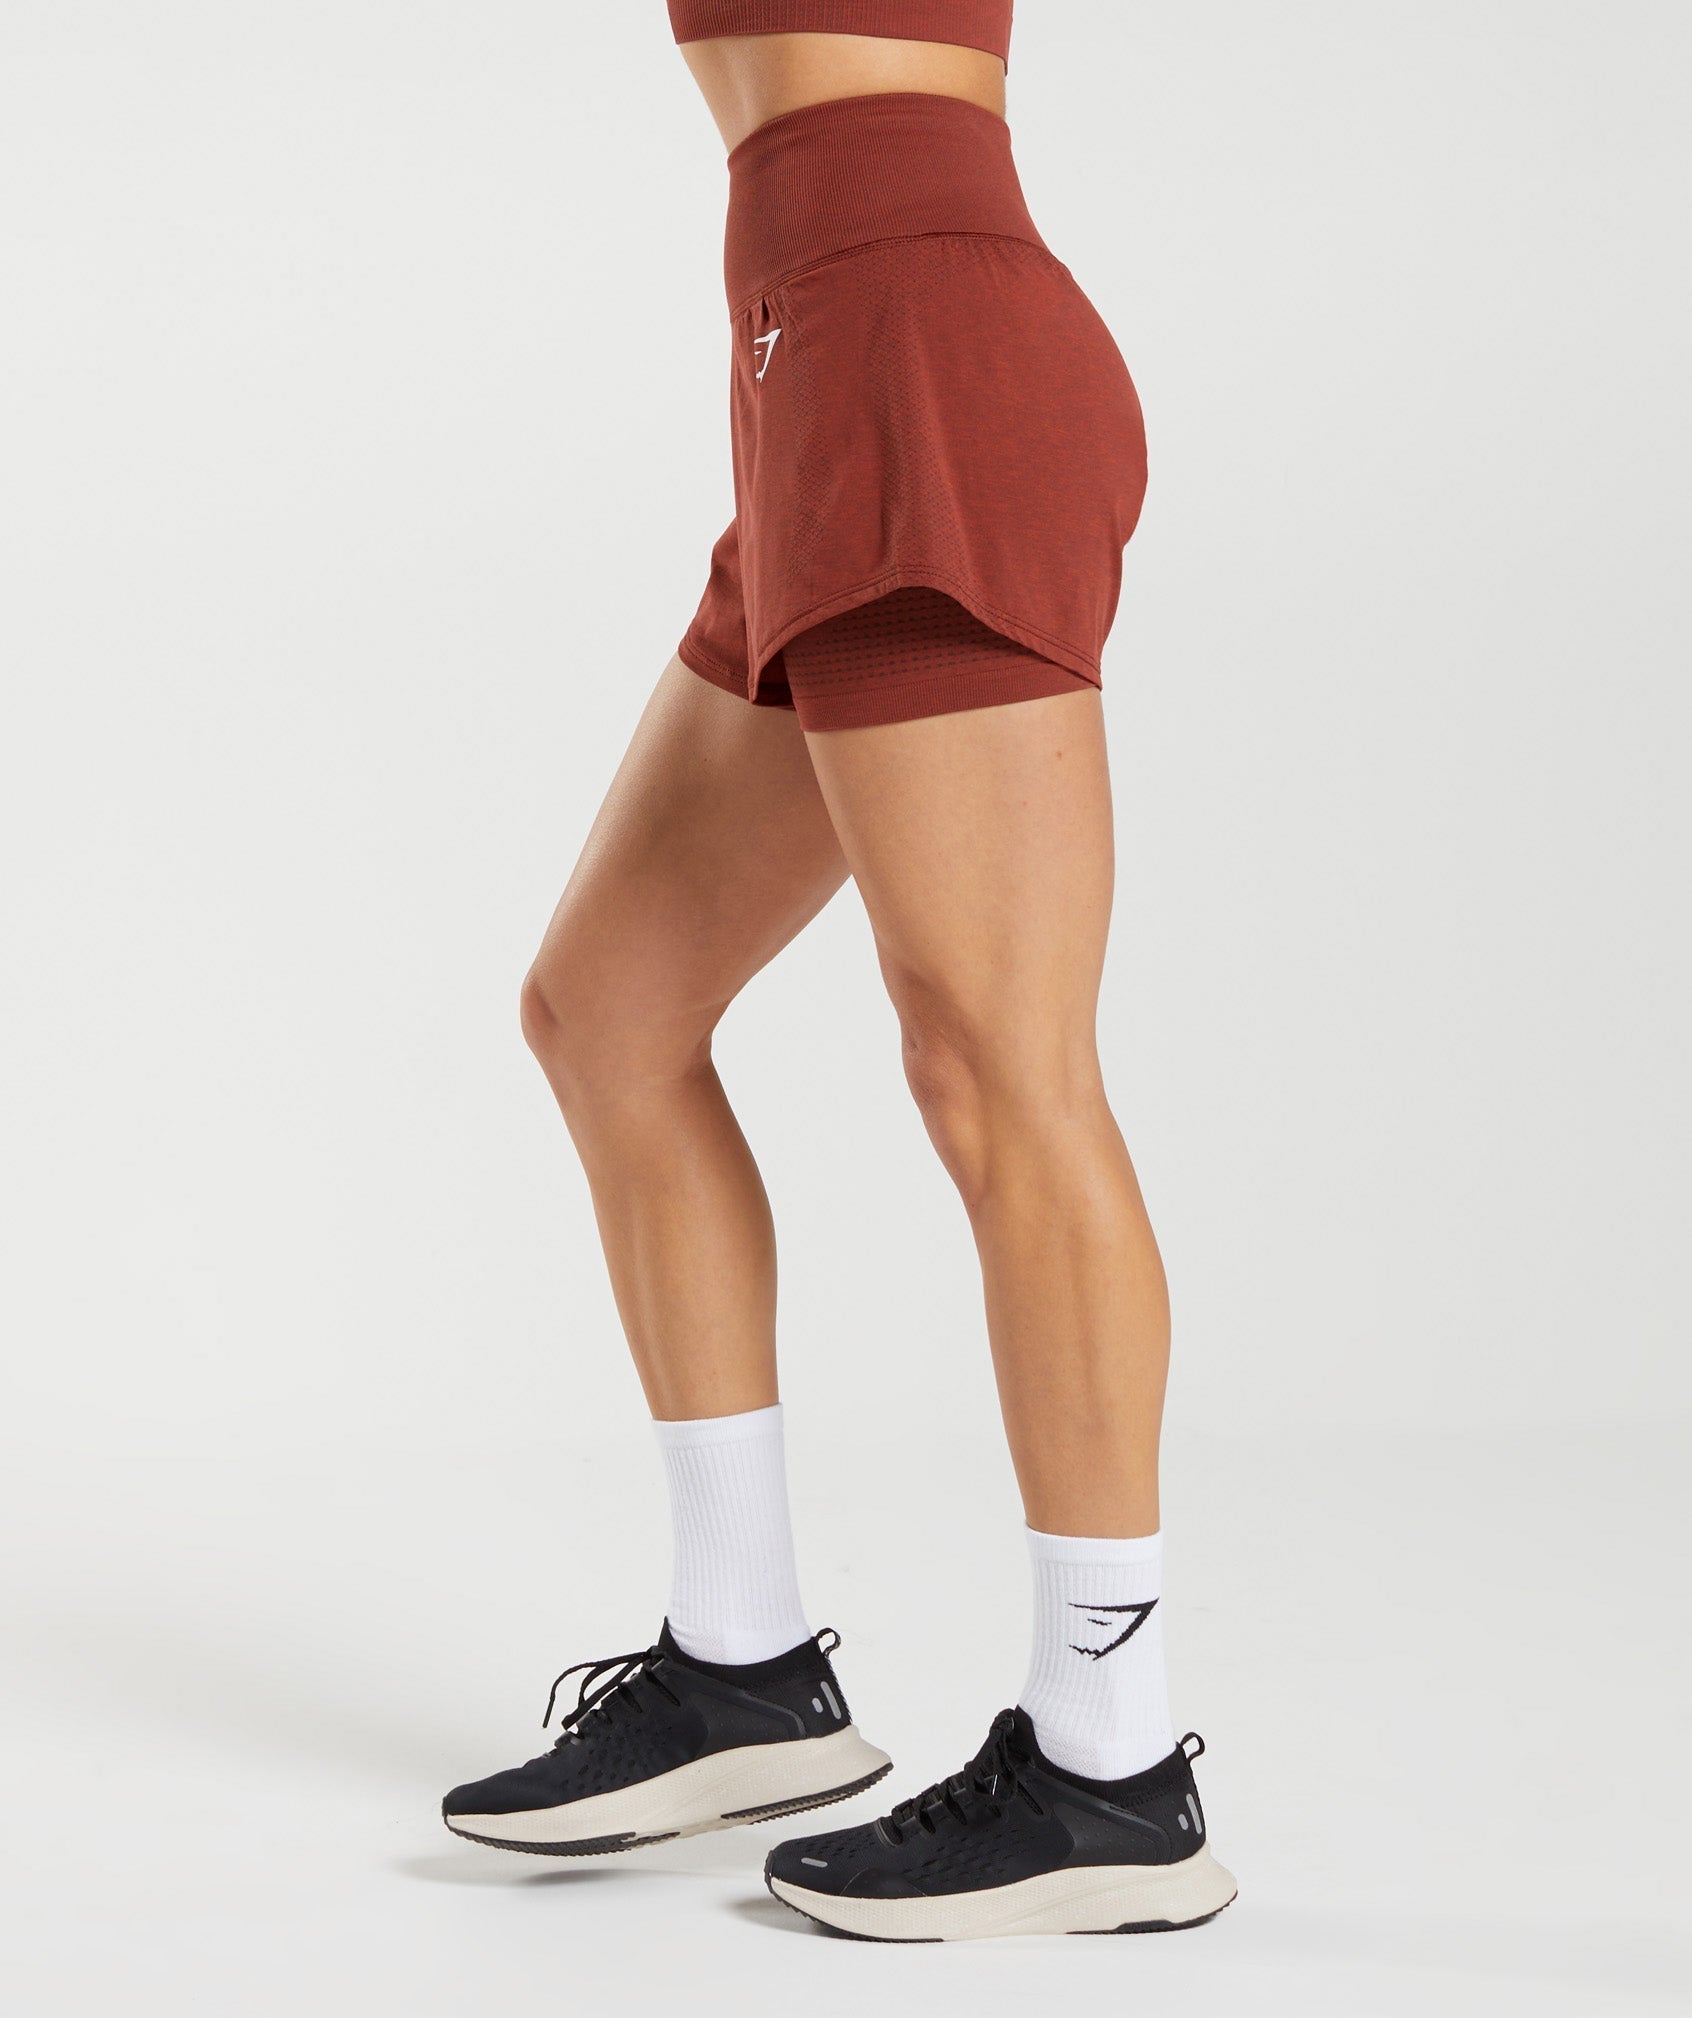 Vital Seamless 2.0 2-in-1 Shorts in Brick Red Marl